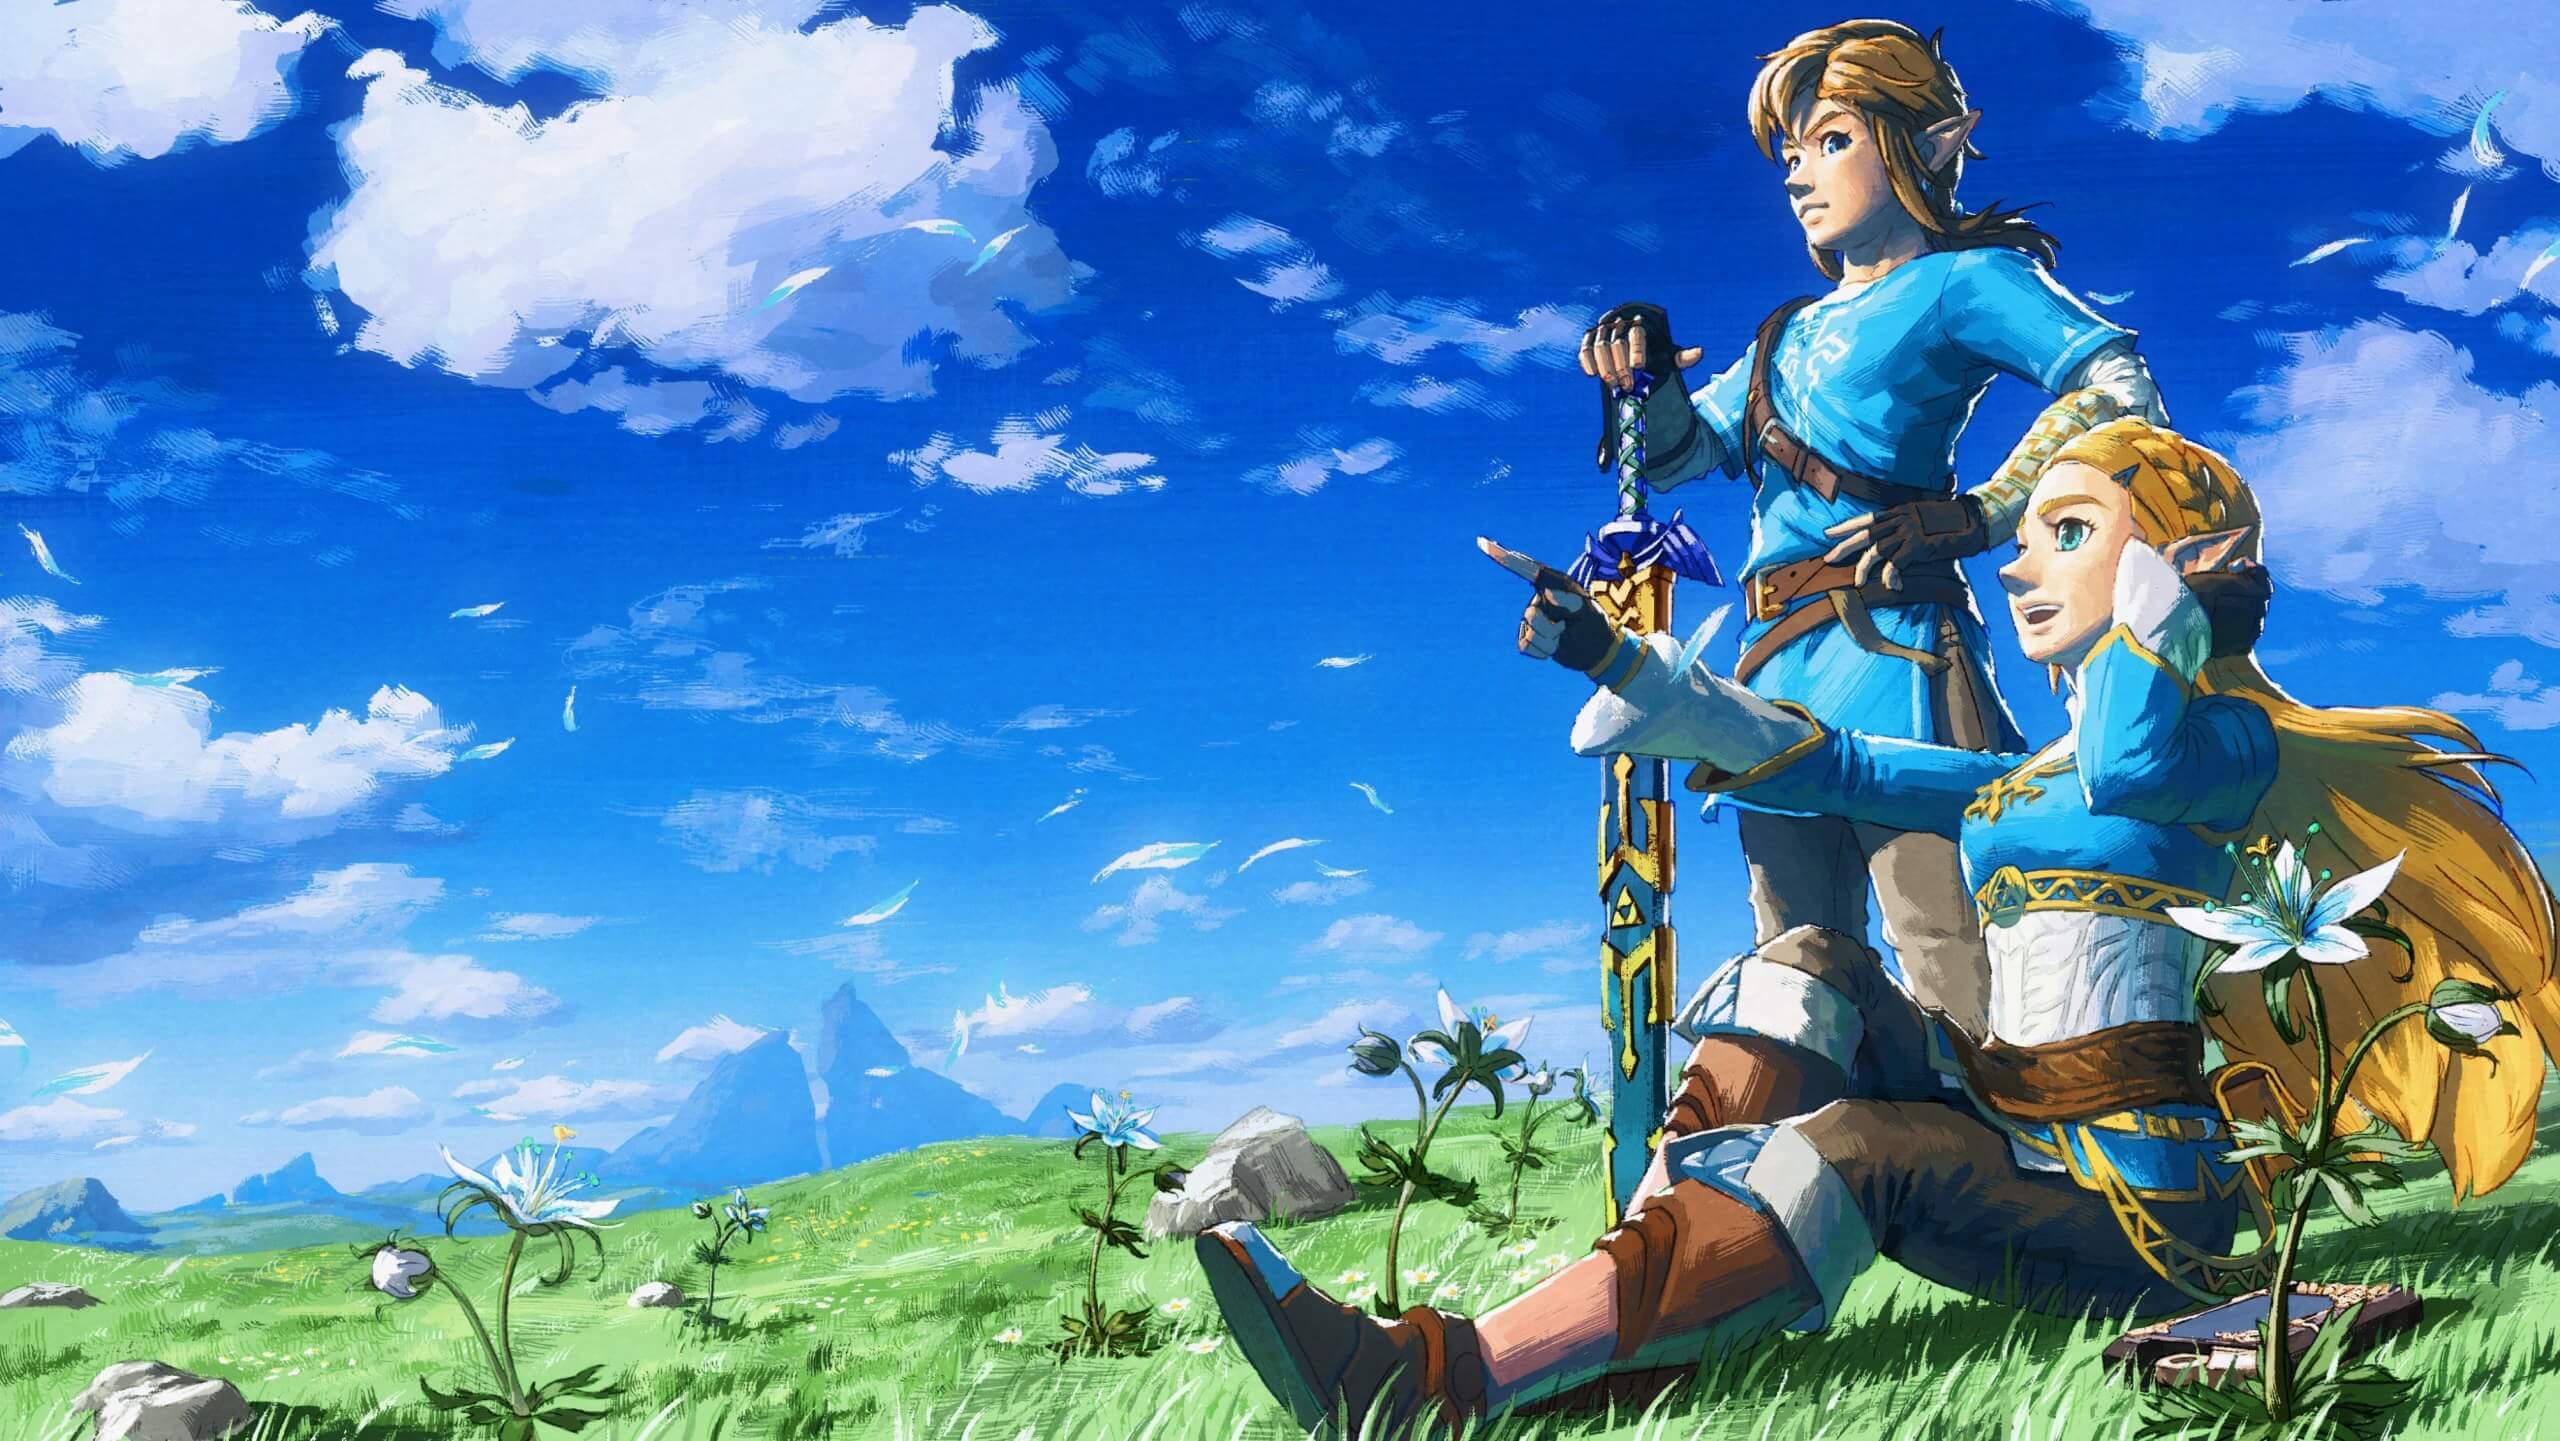 Nintendo announces sequel to Breath of the Wild and more during Nintendo Direct